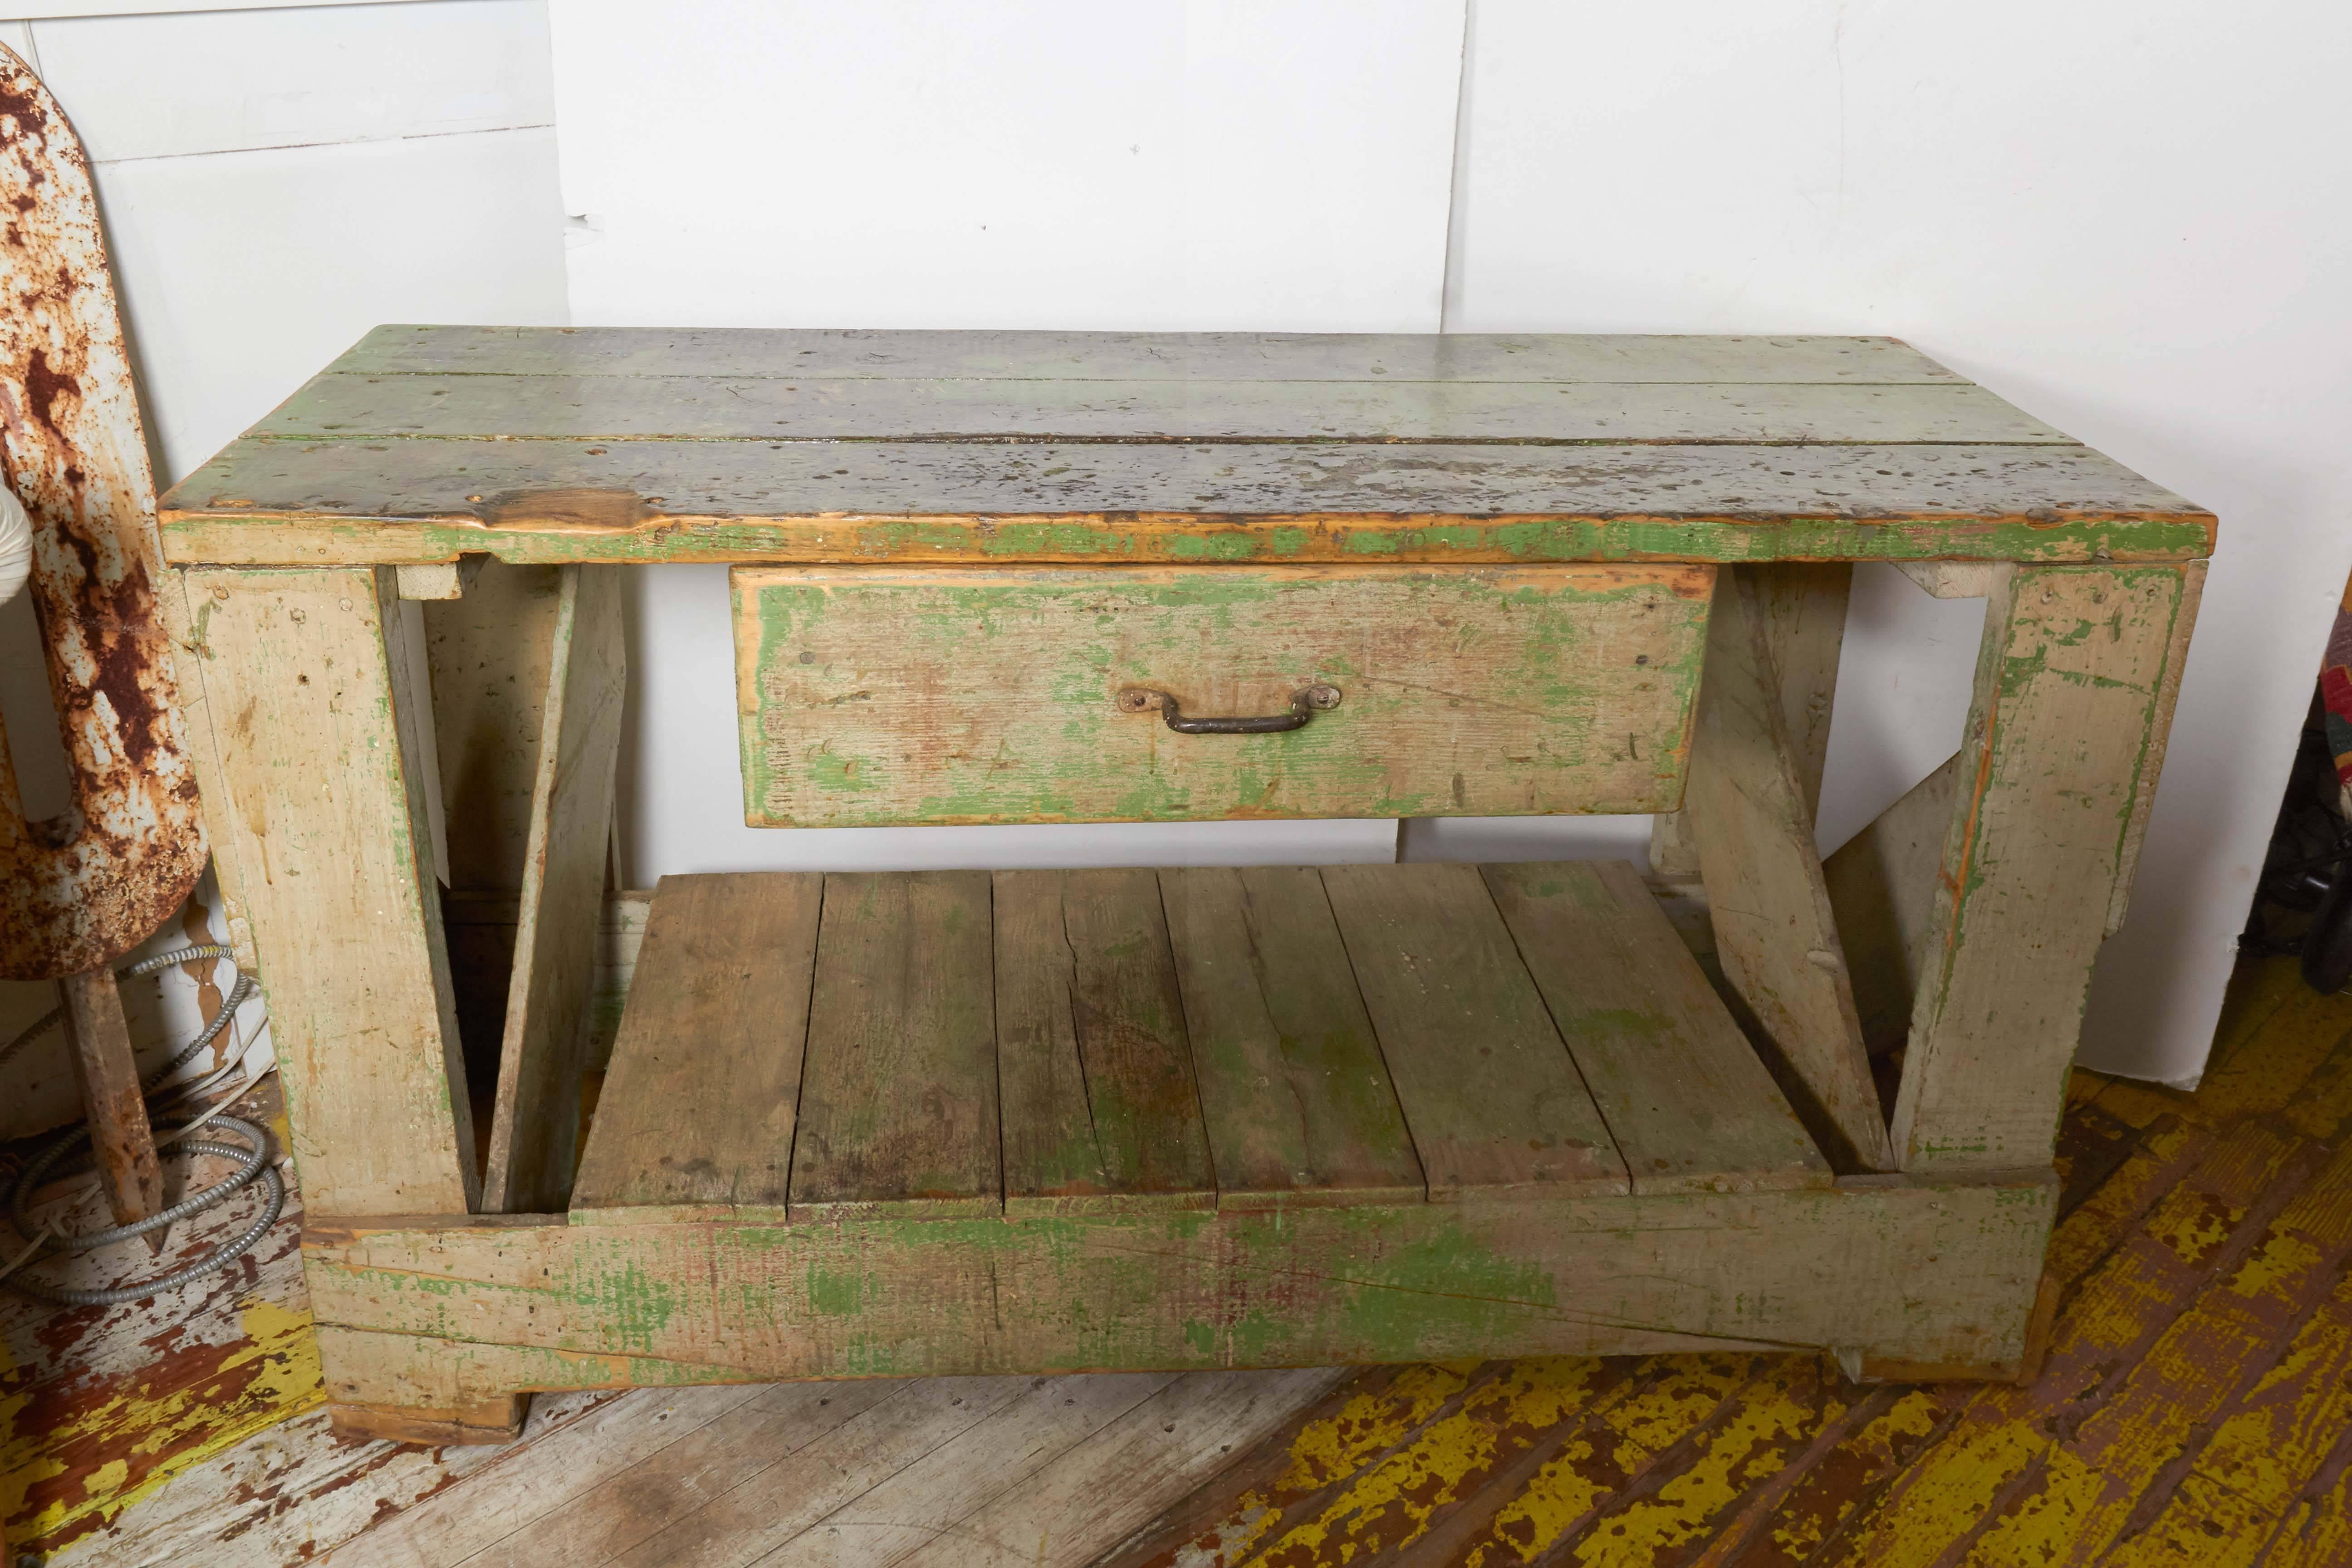 Midwestern work bench from the early 20th century with the original patina.